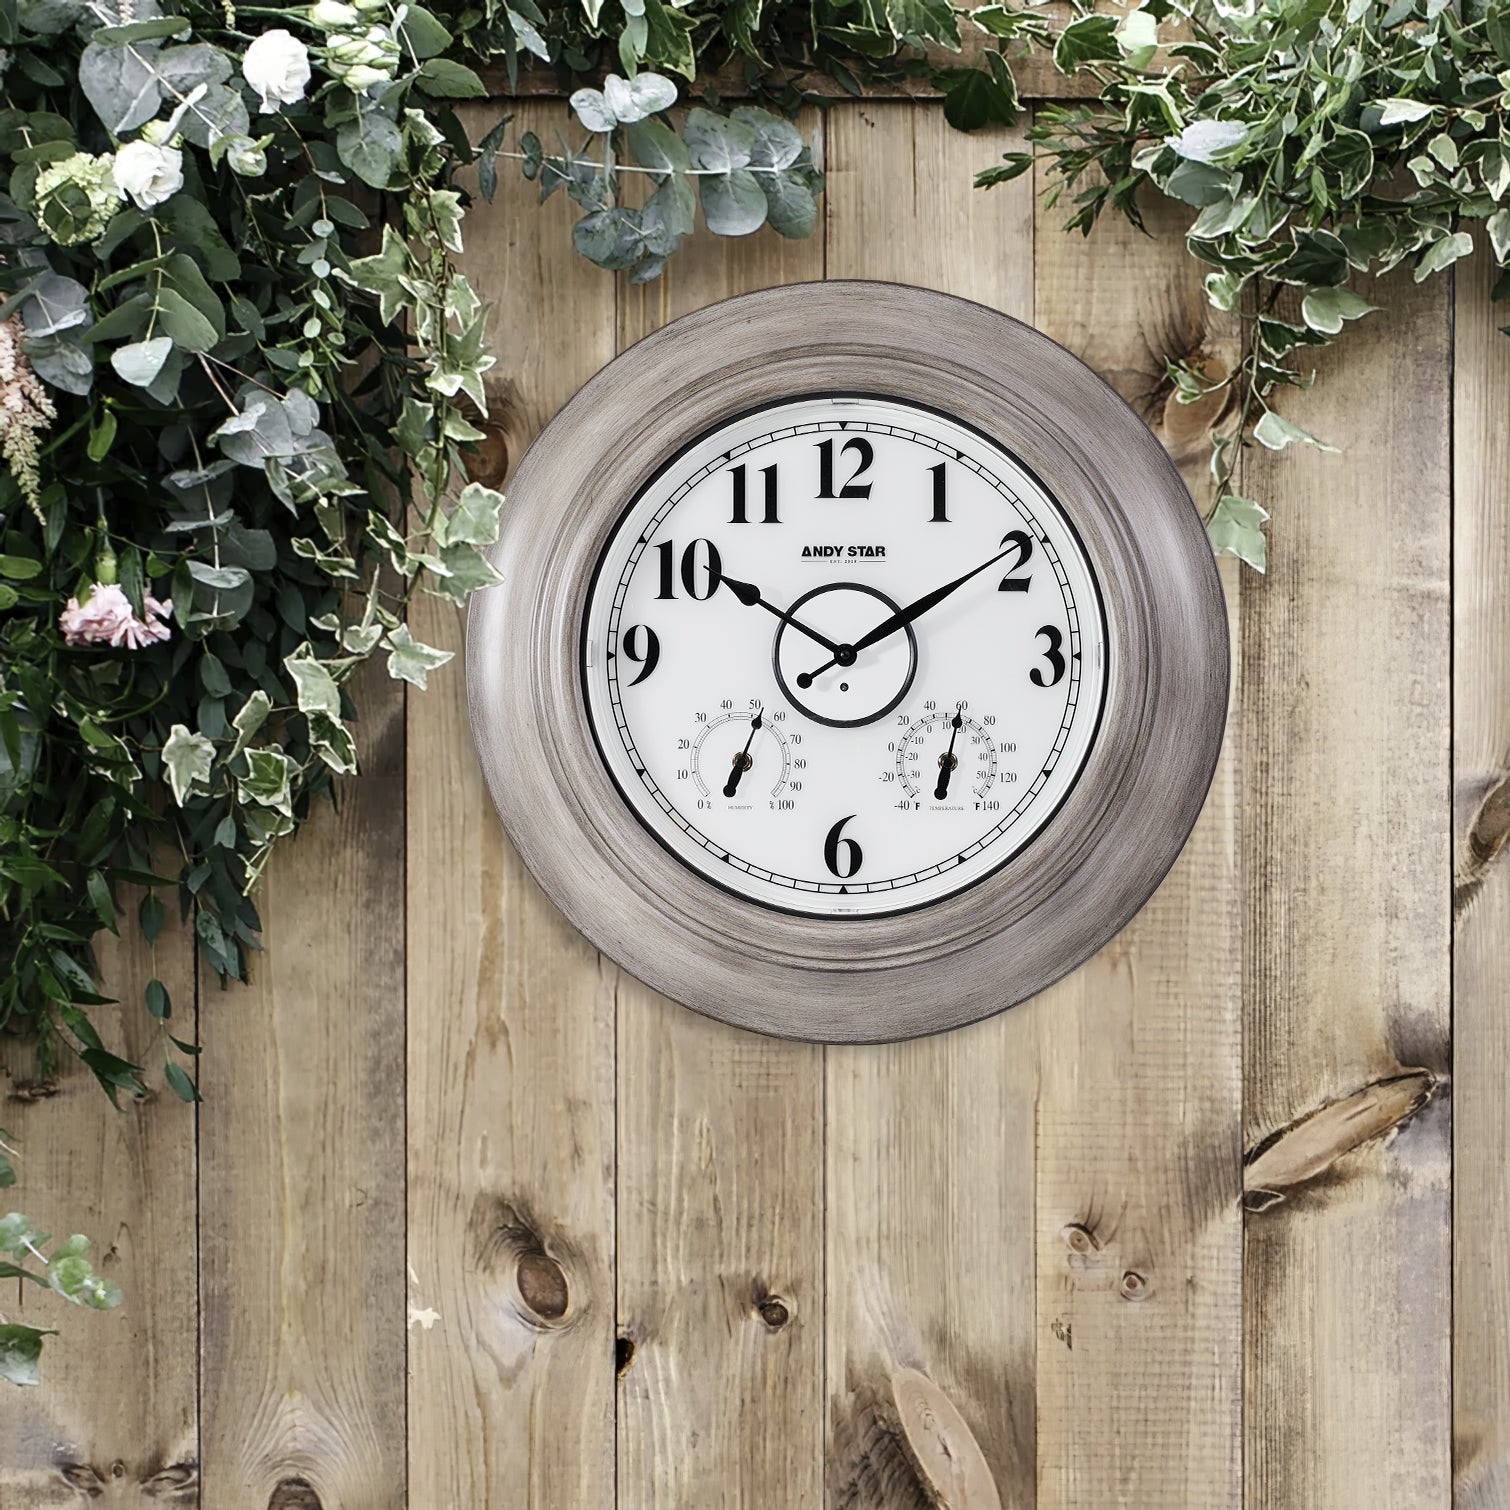 French Indoor Outdoor Weatherproof Large Lighted Clocks Wall Clock with Thermometer  for Patio, Garden